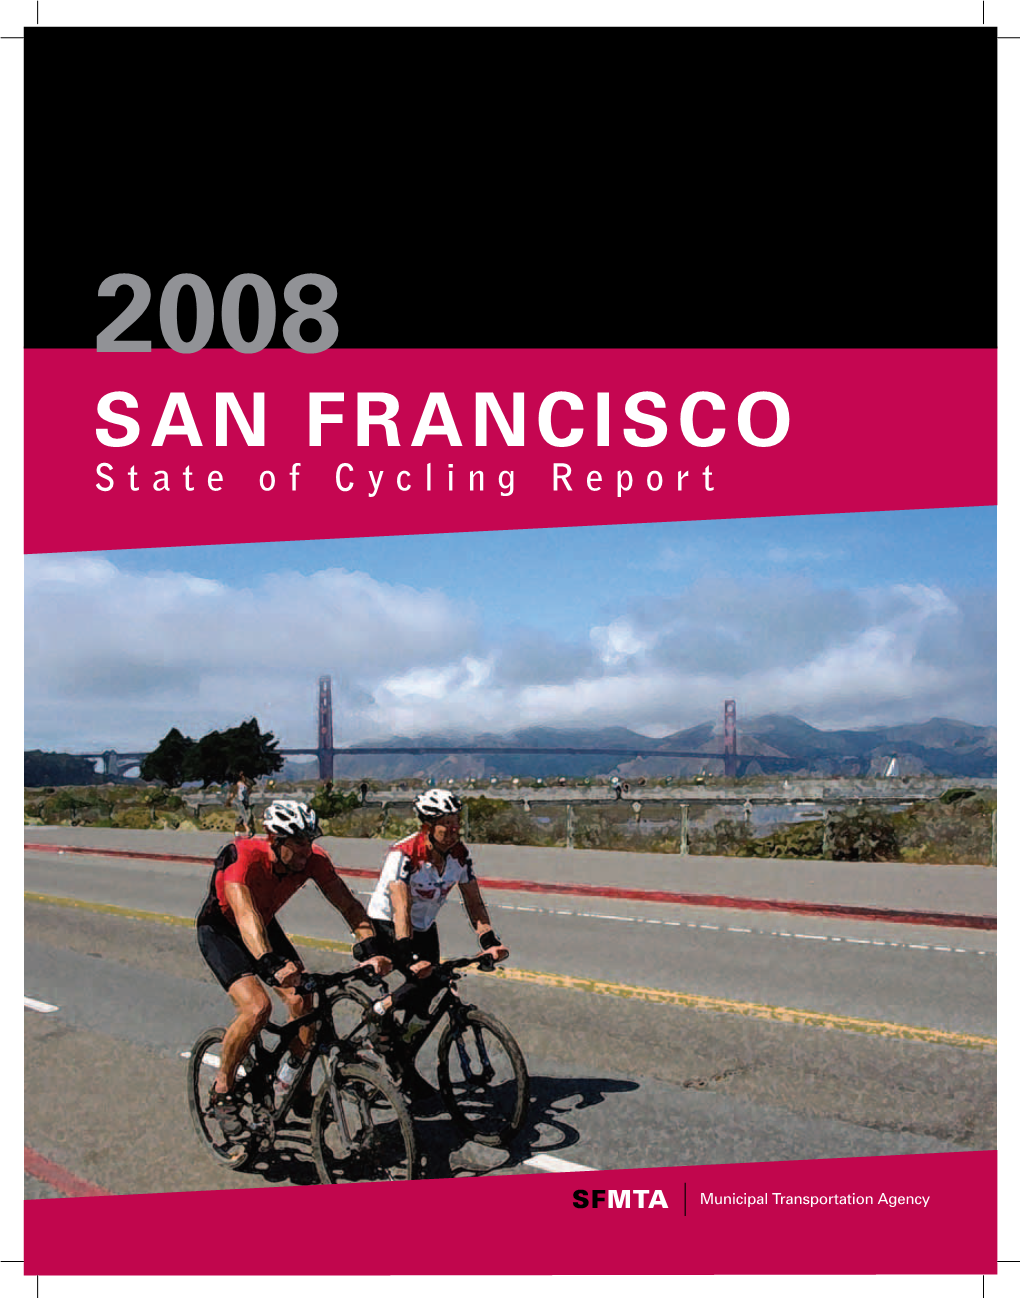 2008 SF State of Cycling Report